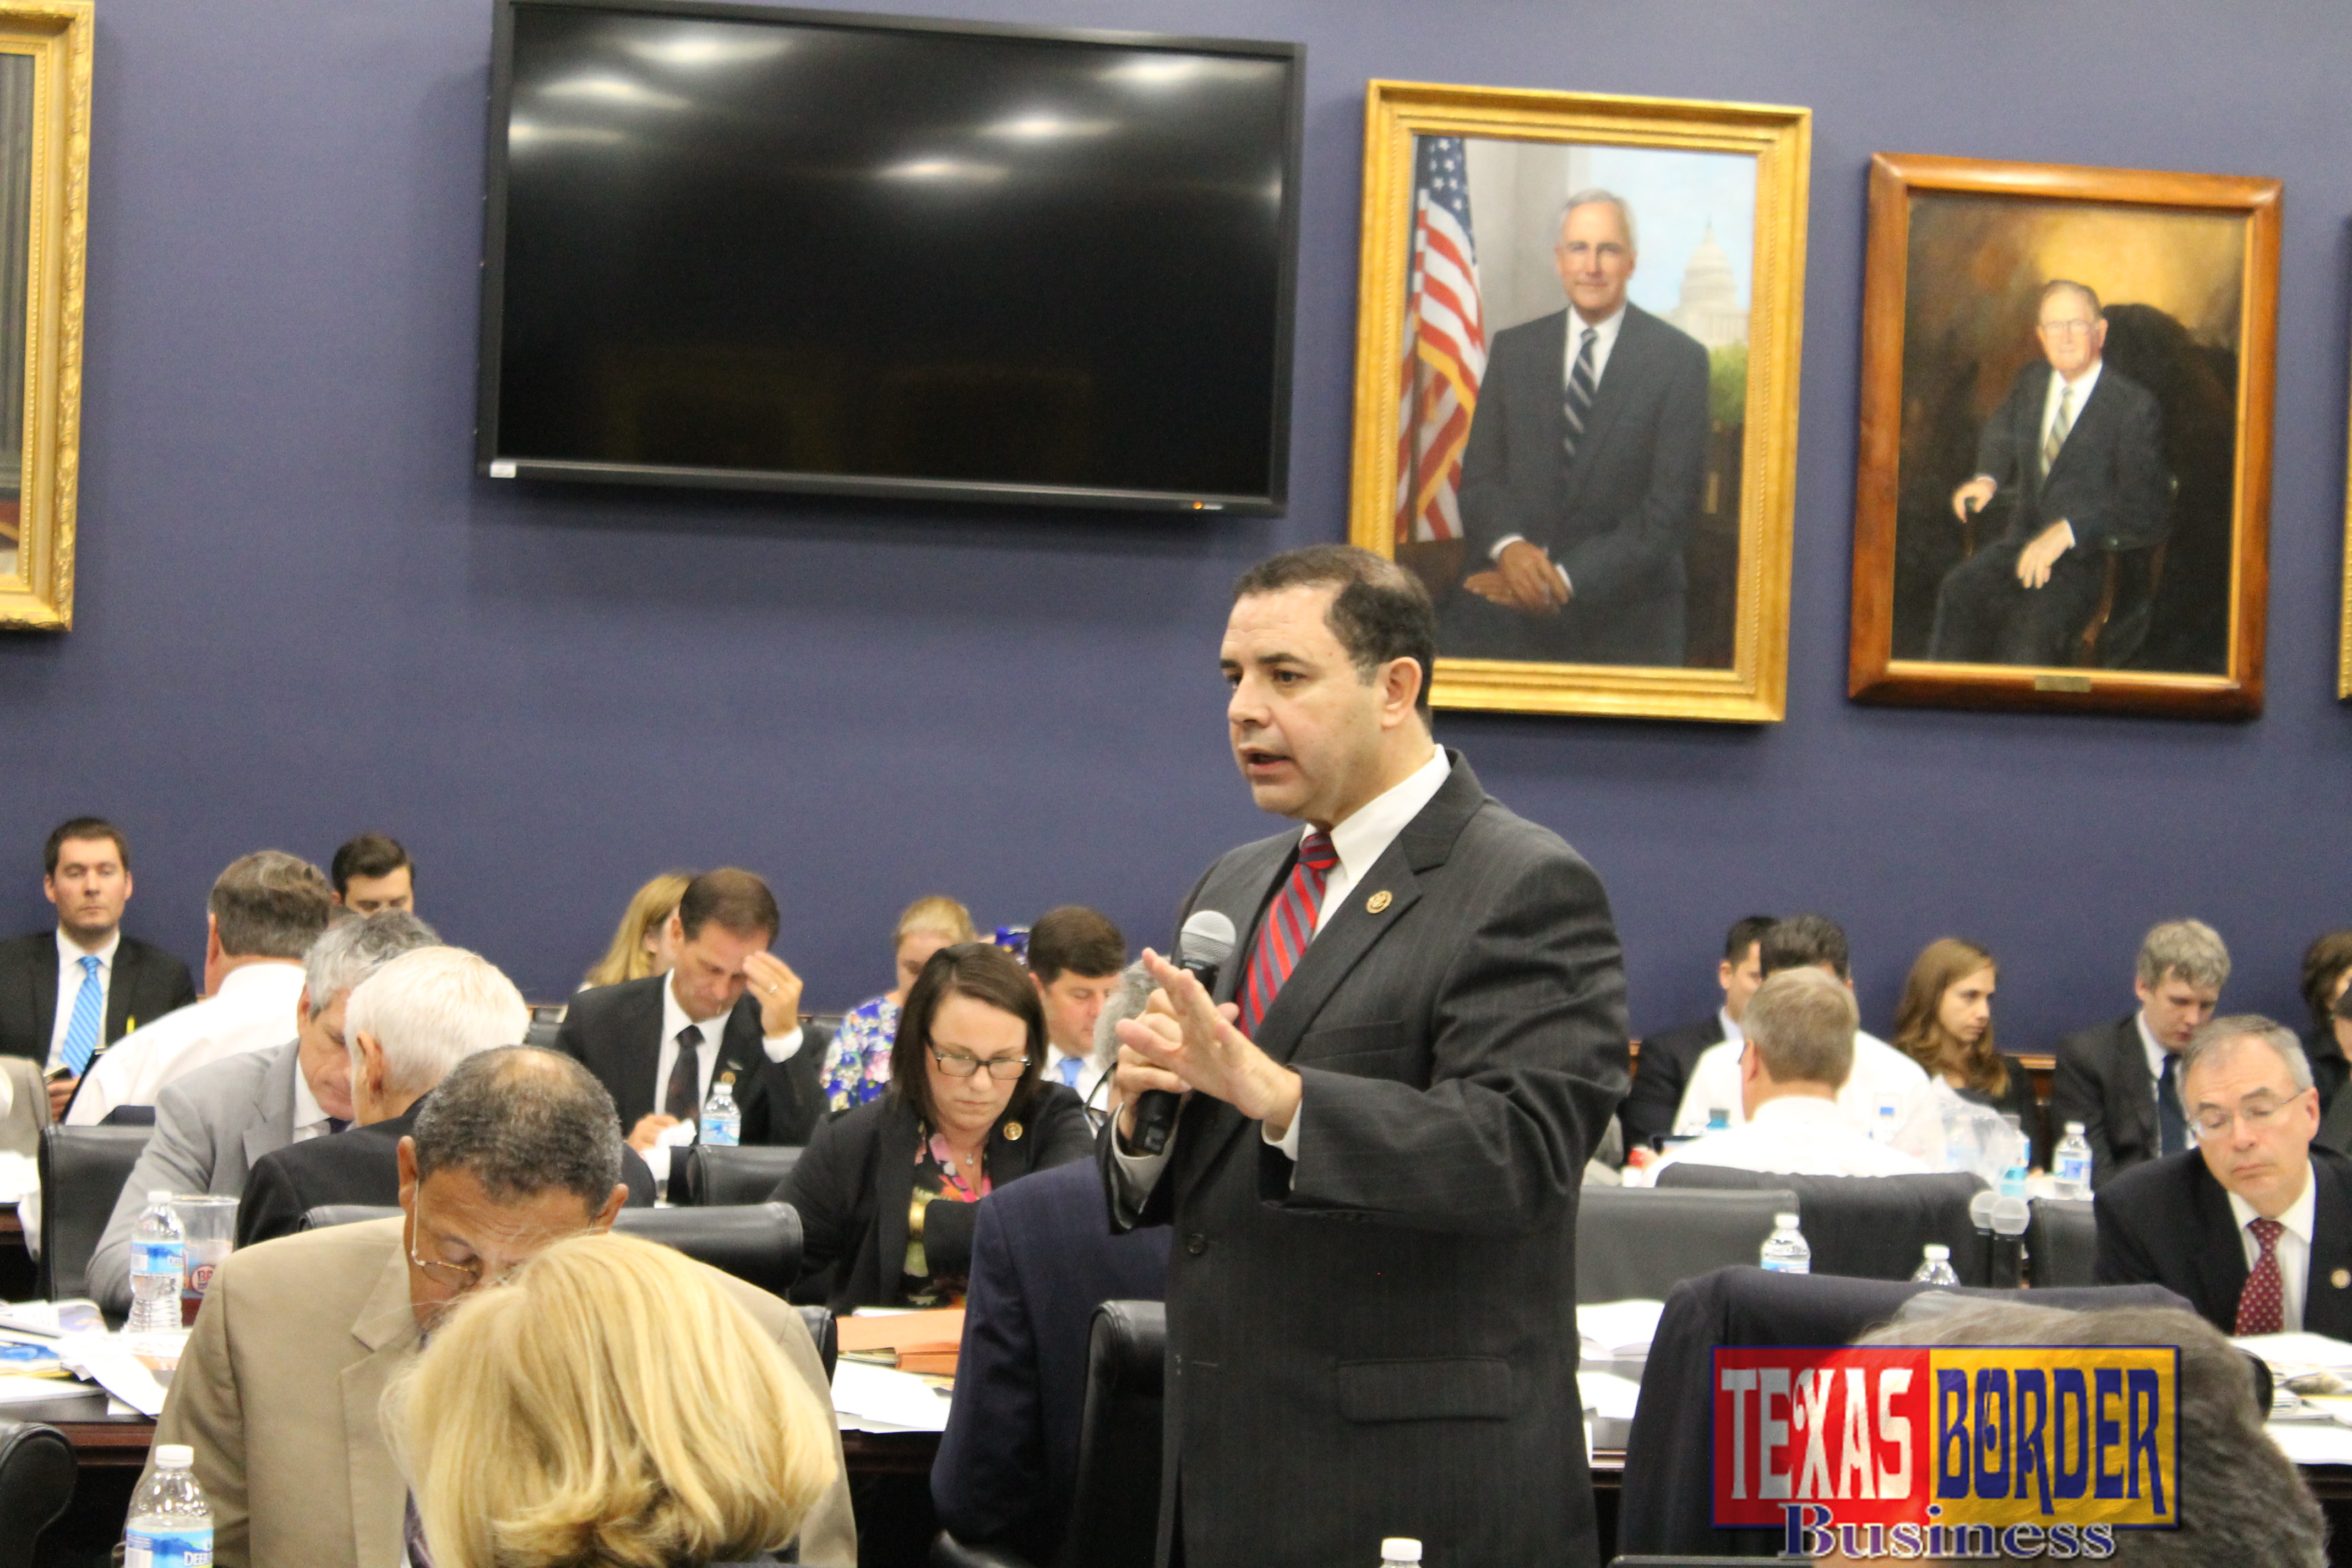 In the first of two U.S. House Appropriations Committee markups, or reviews of federal spending bills, Tuesday morning, Congressman Cuellar spoke about the language he included in the Fiscal Year 2017 U.S. House Transportation, Housing and Urban Development, and Related Agencies Appropriations bill to address rail congestion through Laredo, reduce veteran homelessness, better deal with the transportation of hazardous materials, and give local communities a greater say in border transportation priorities.